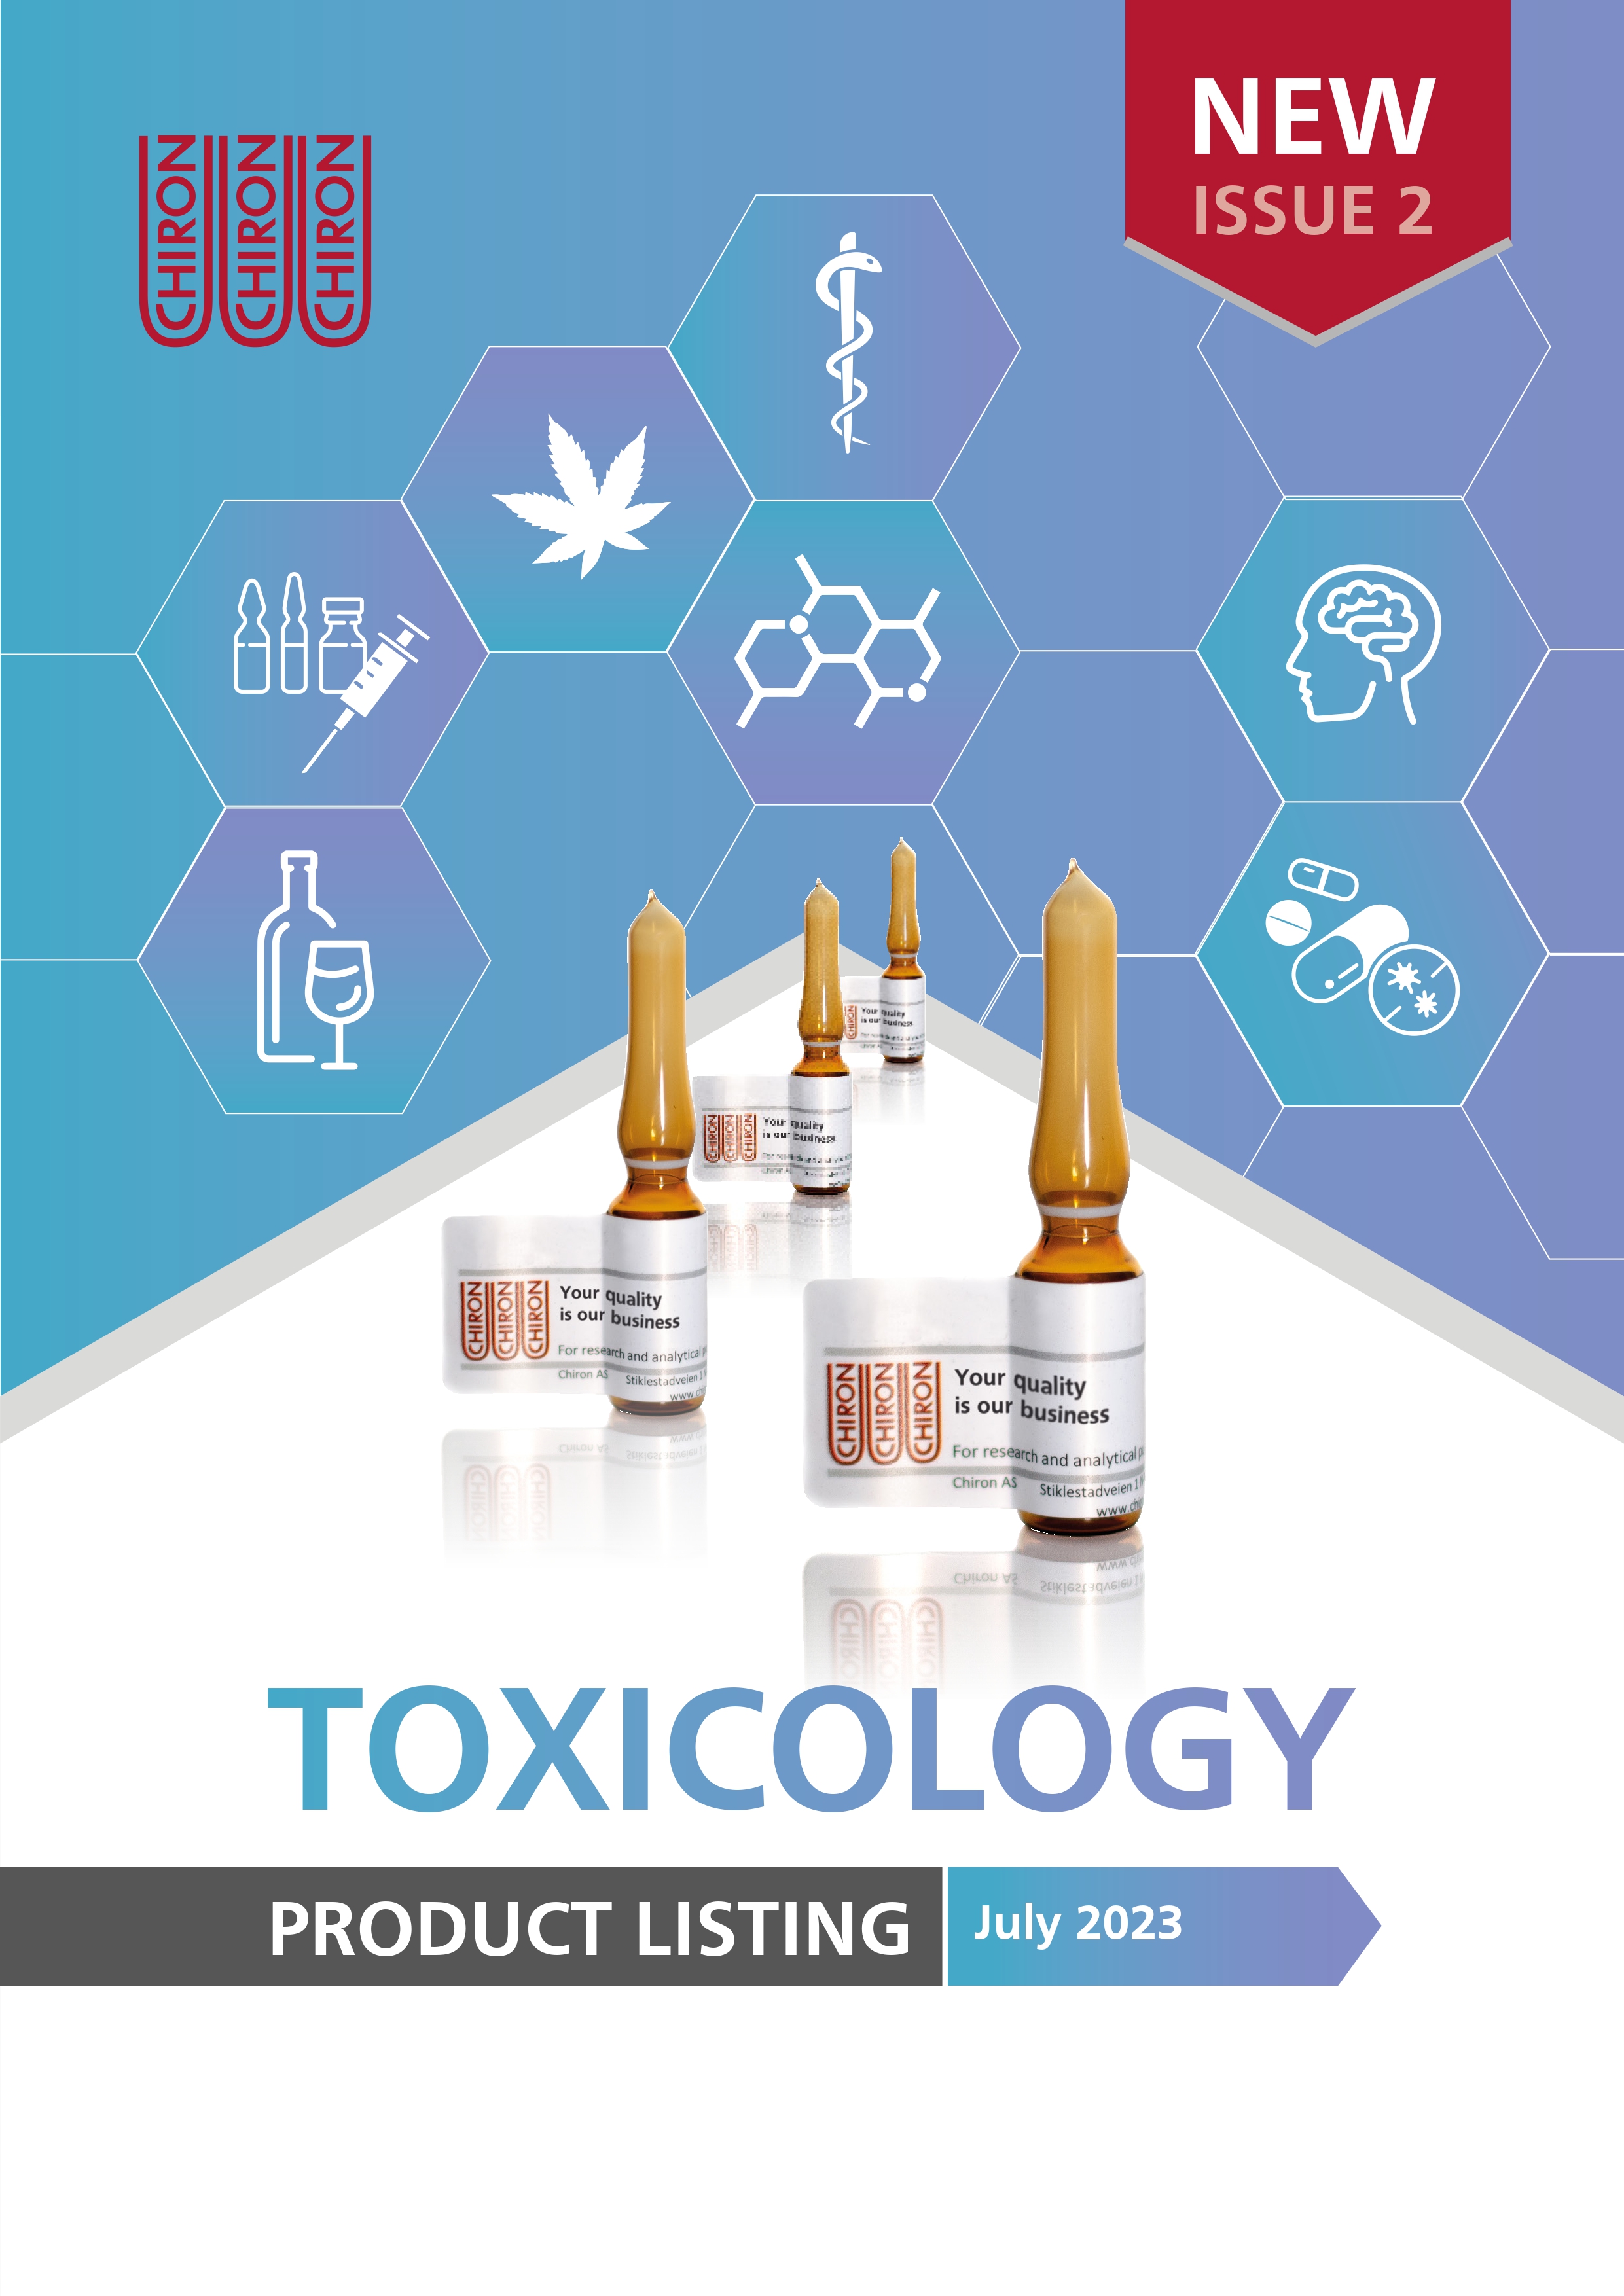 New Toxicology Product Issue 2 | July 2023